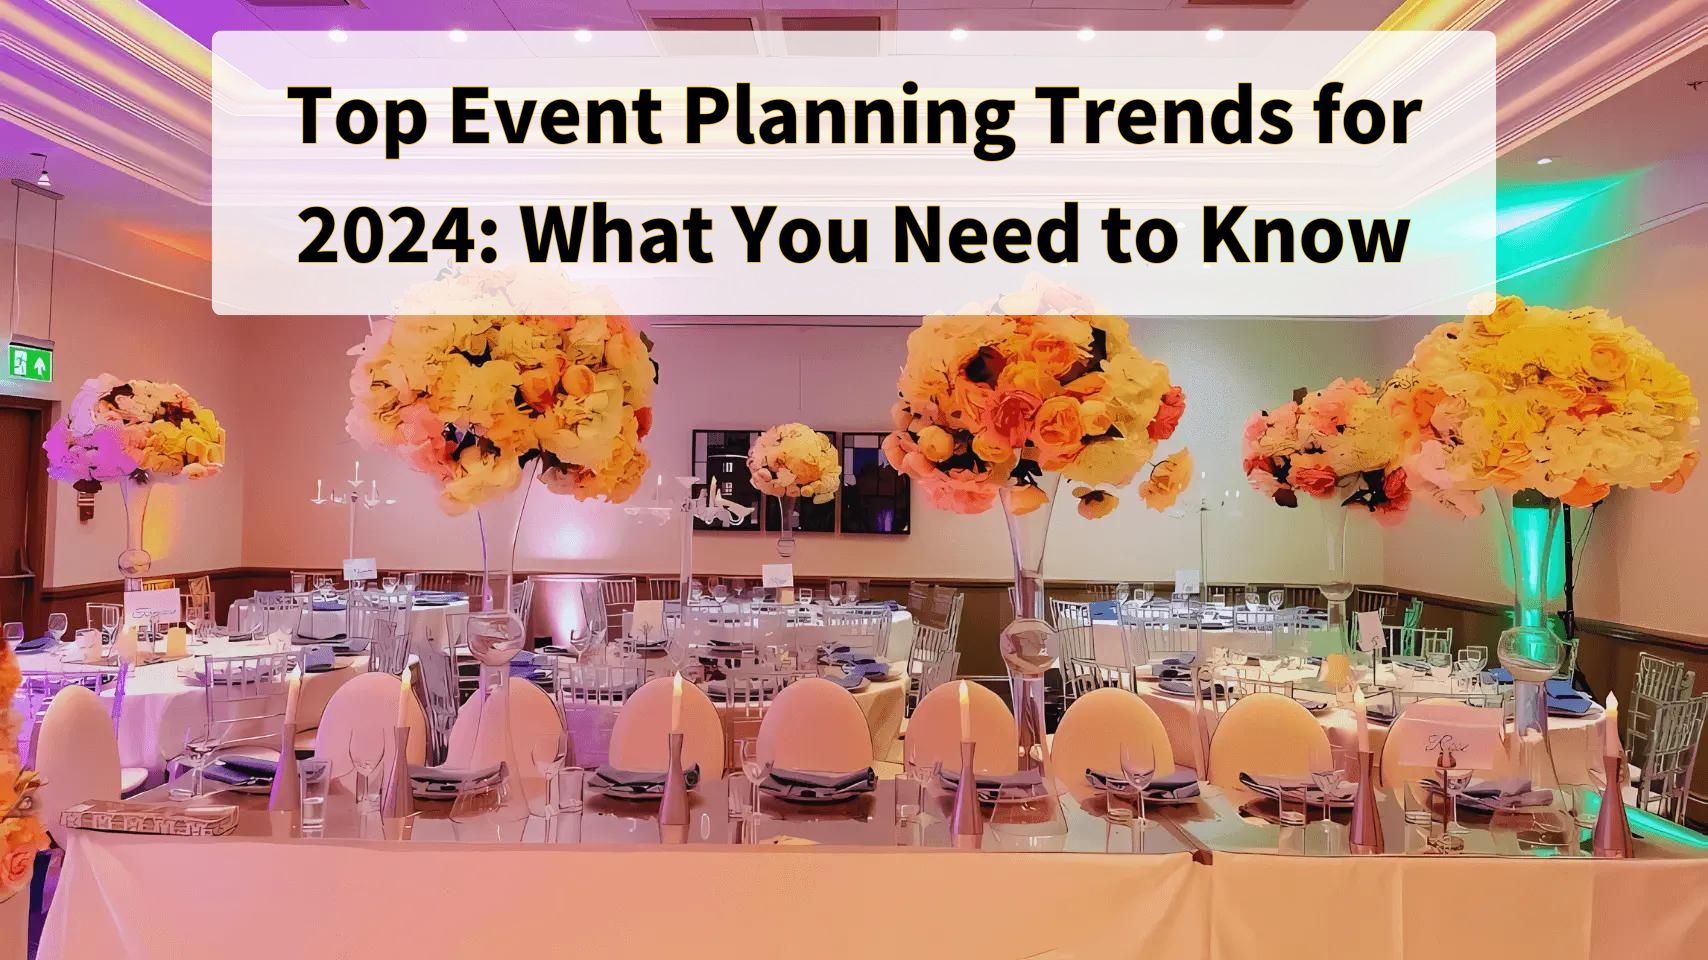 Top Event Planning Trends for 2024: What You Need to Know